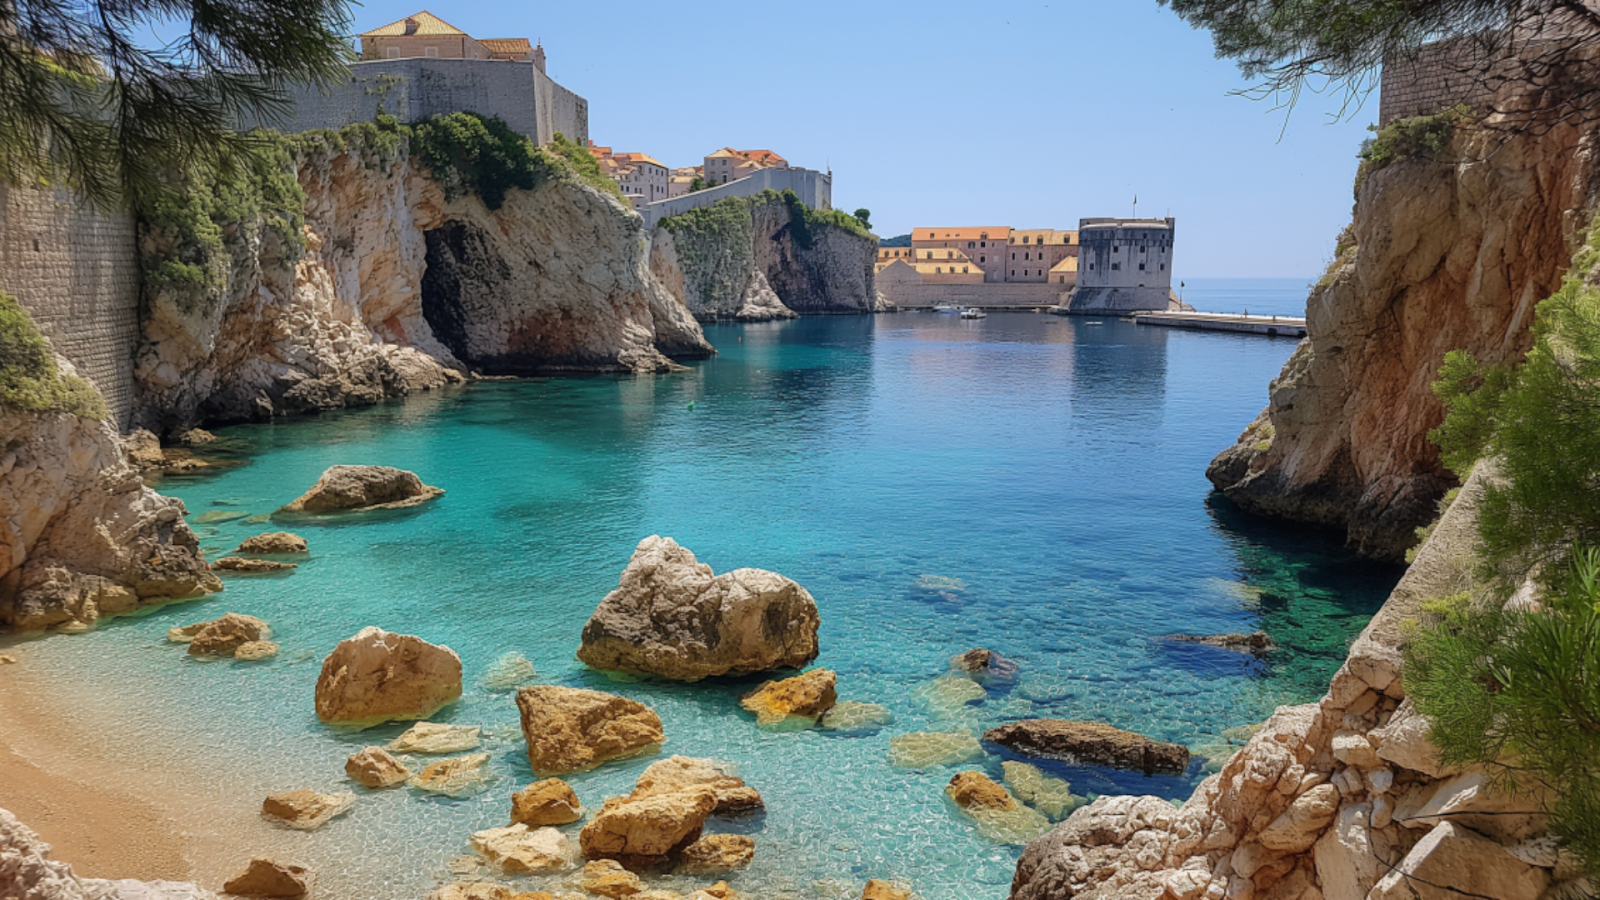 Dubrovnik's historic walls offer a tranquil escape from the crowds.